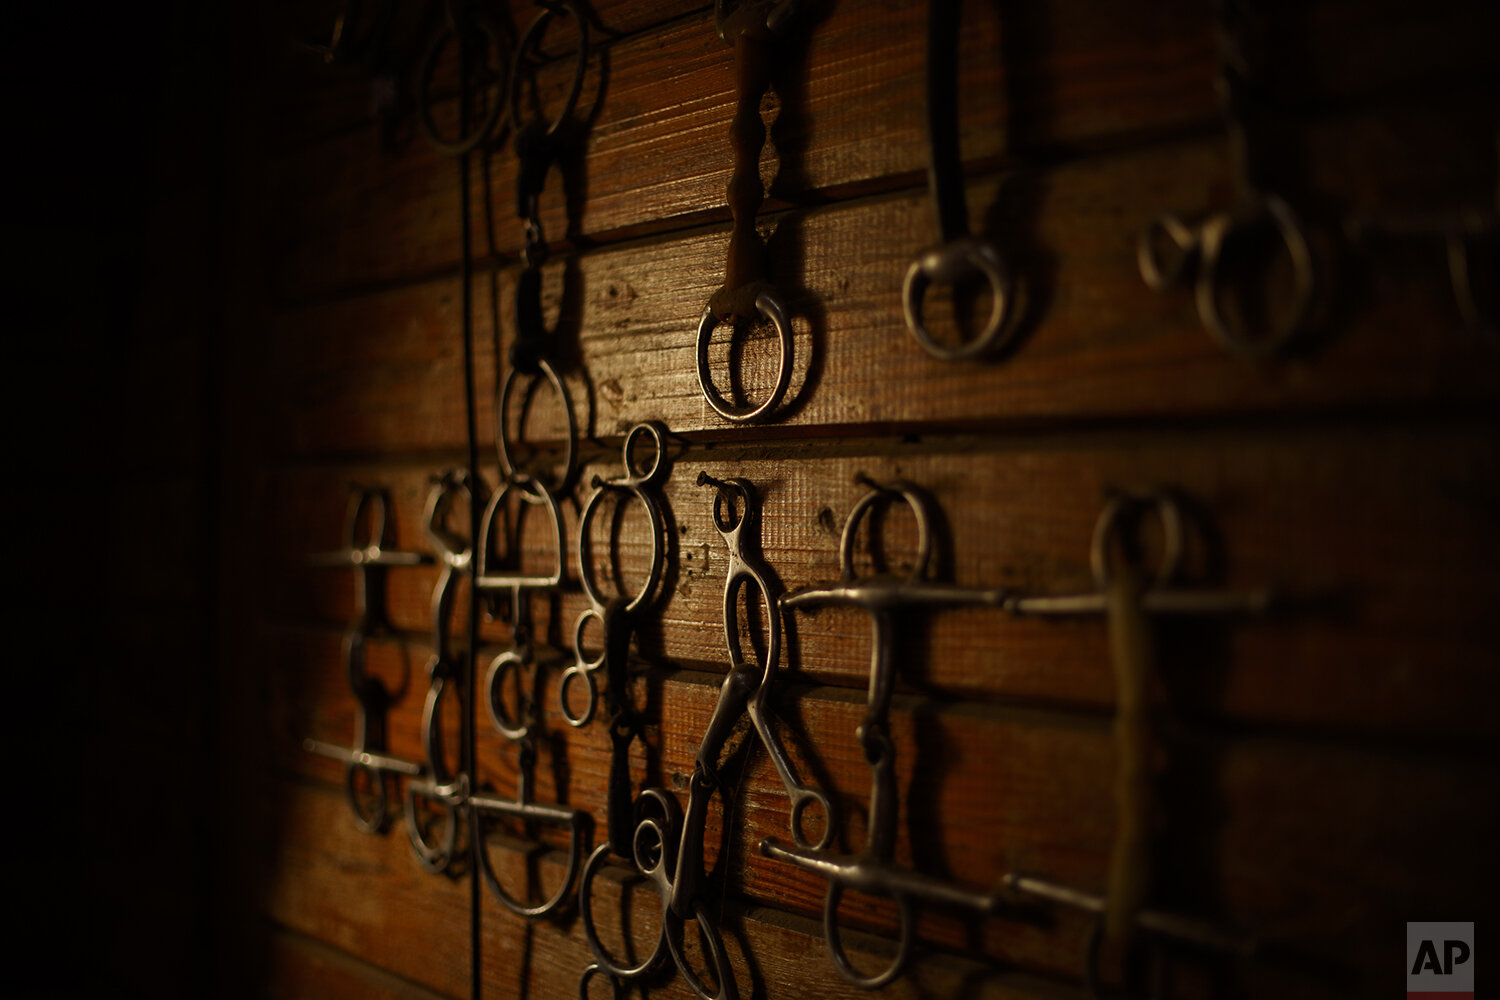  Horse tack hangs on the barn wall at True Prospect Farm, the farm of Phillip Dutton, a medal-winning equestrian on the U.S. Olympic team, Thursday, April 2, 2020, in West Grove, Pa. (AP Photo/Matt Slocum) 